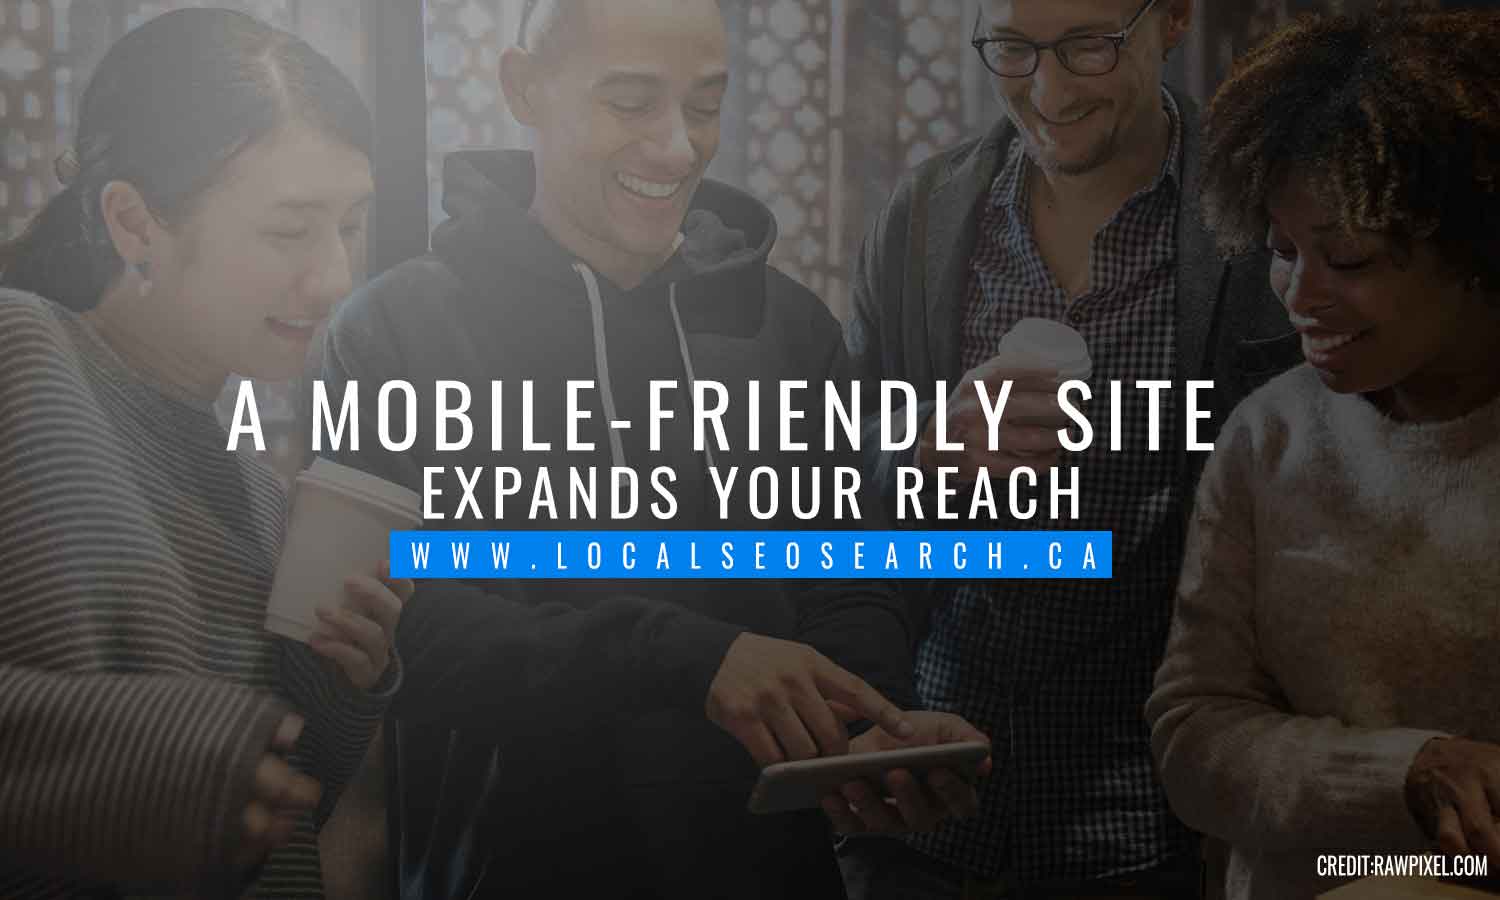 mobile-friendly site expands your reach